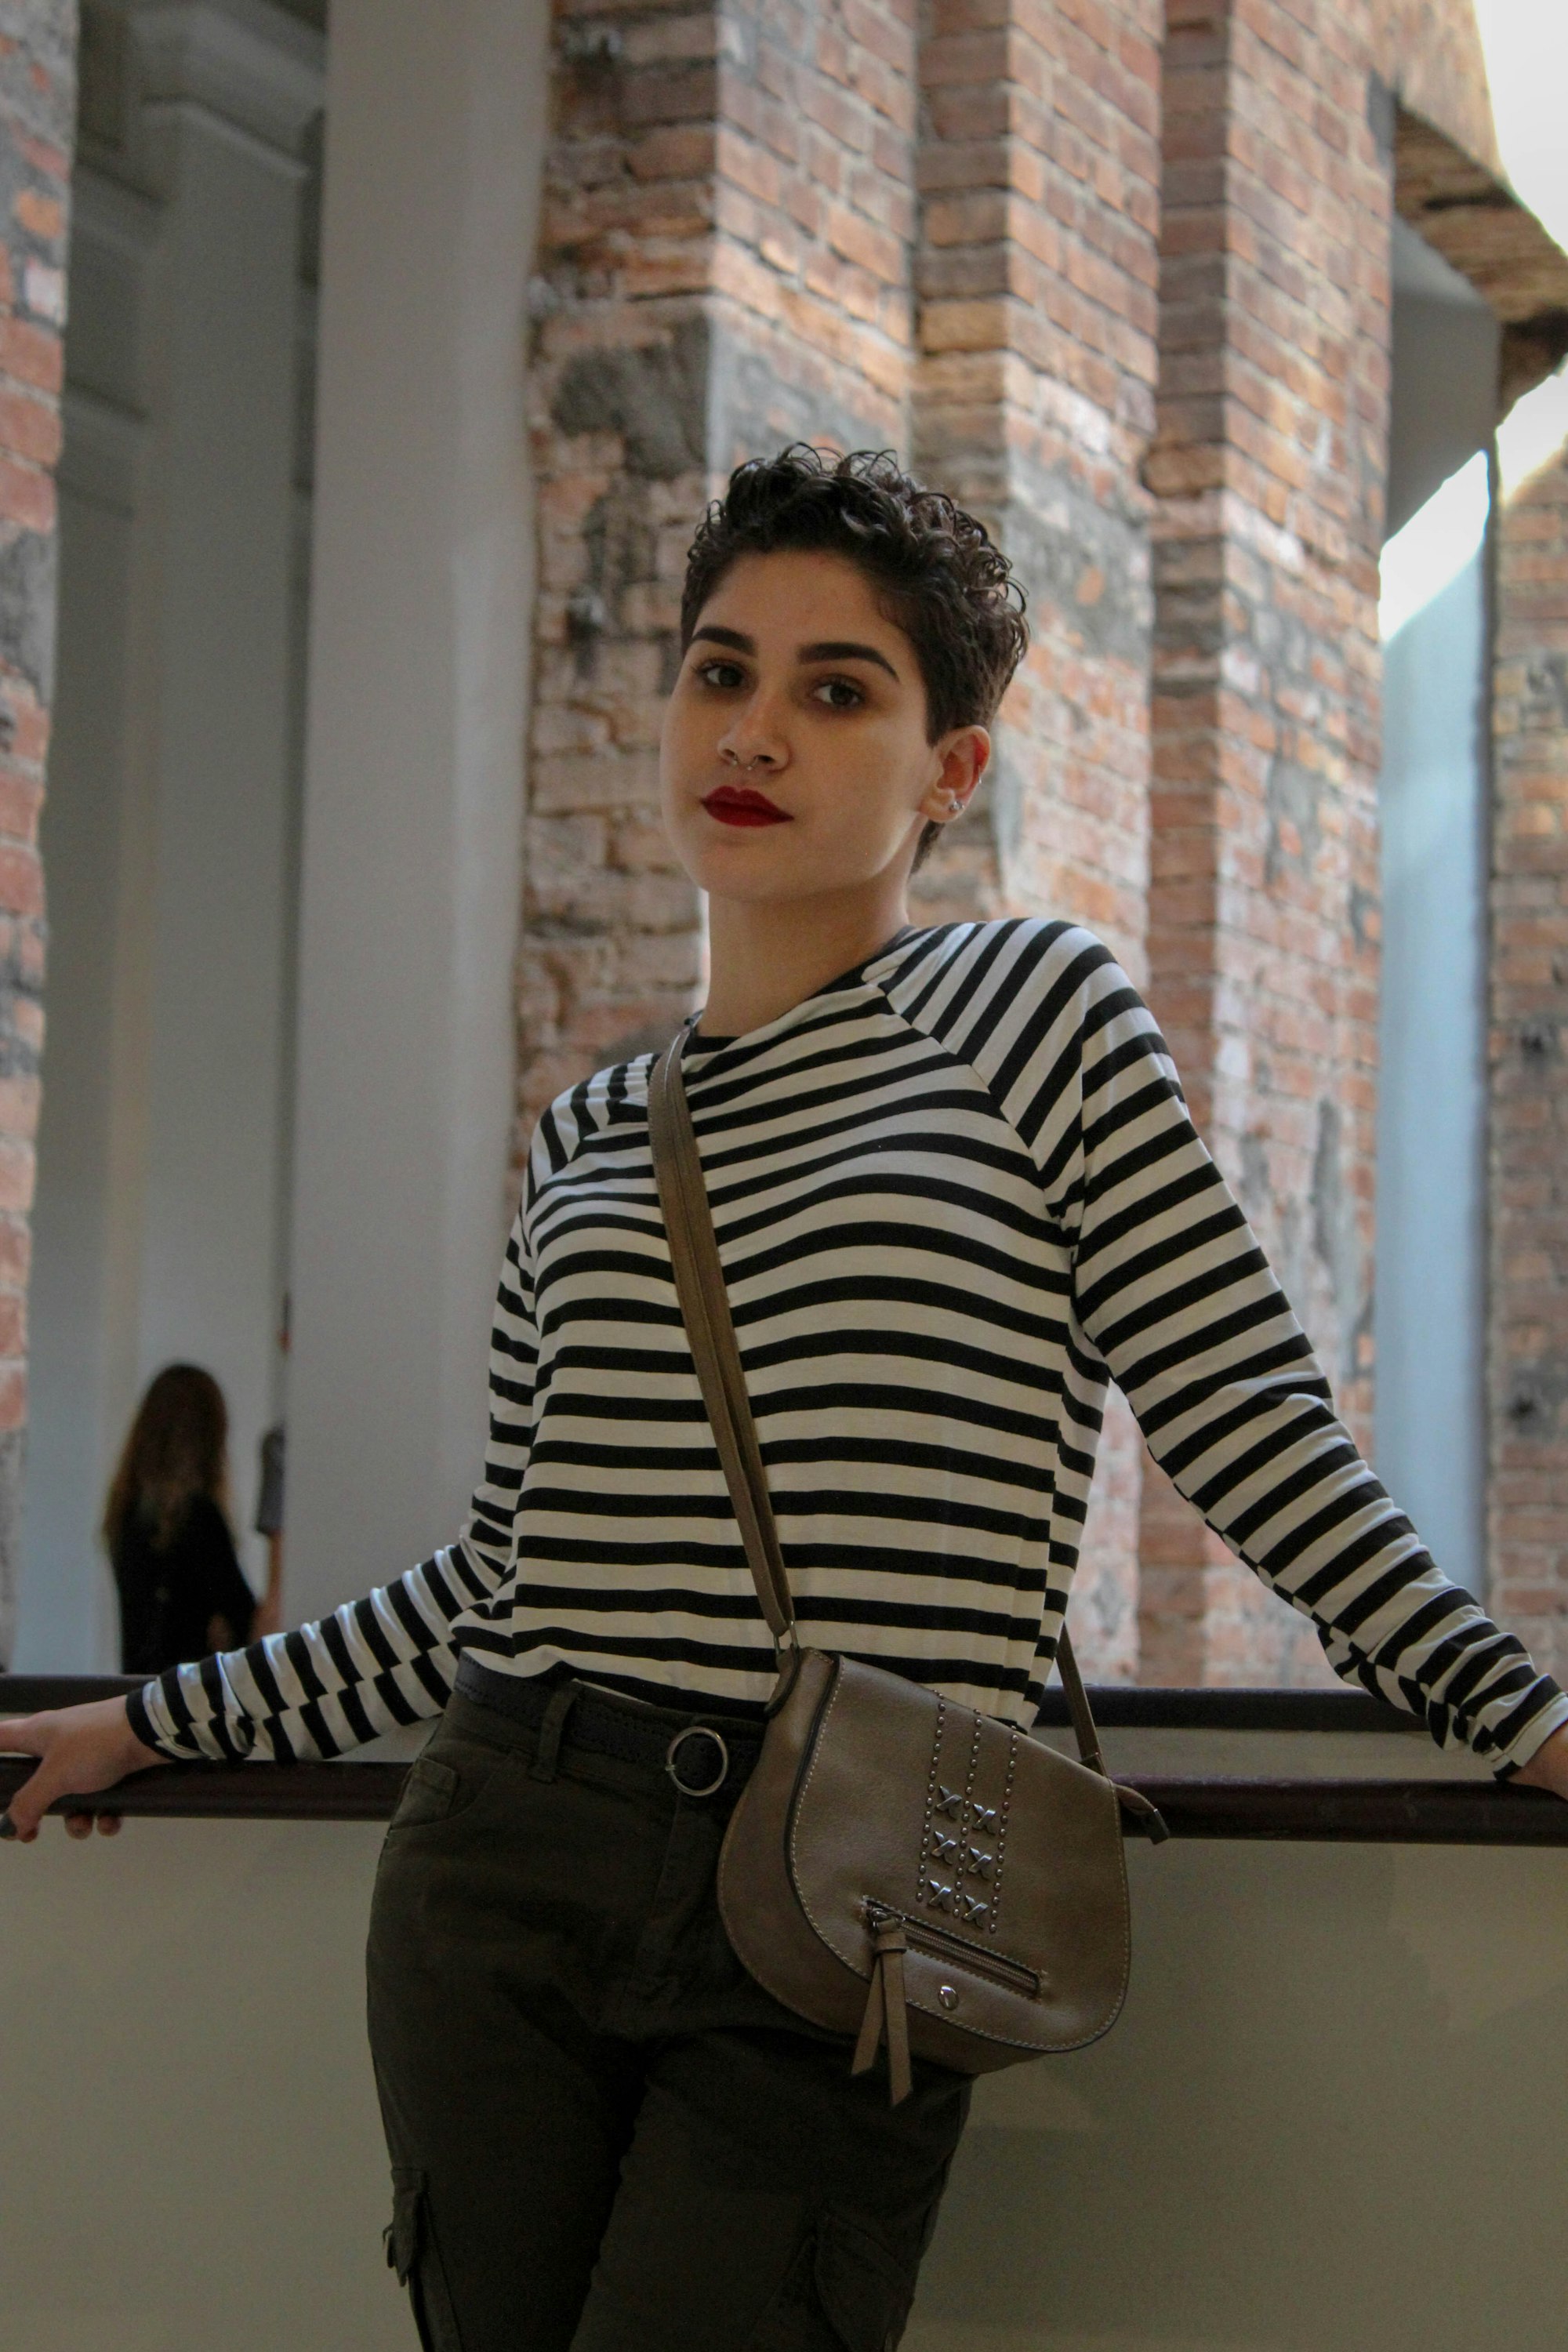 Women in black and white striped top wearing crossbody bag